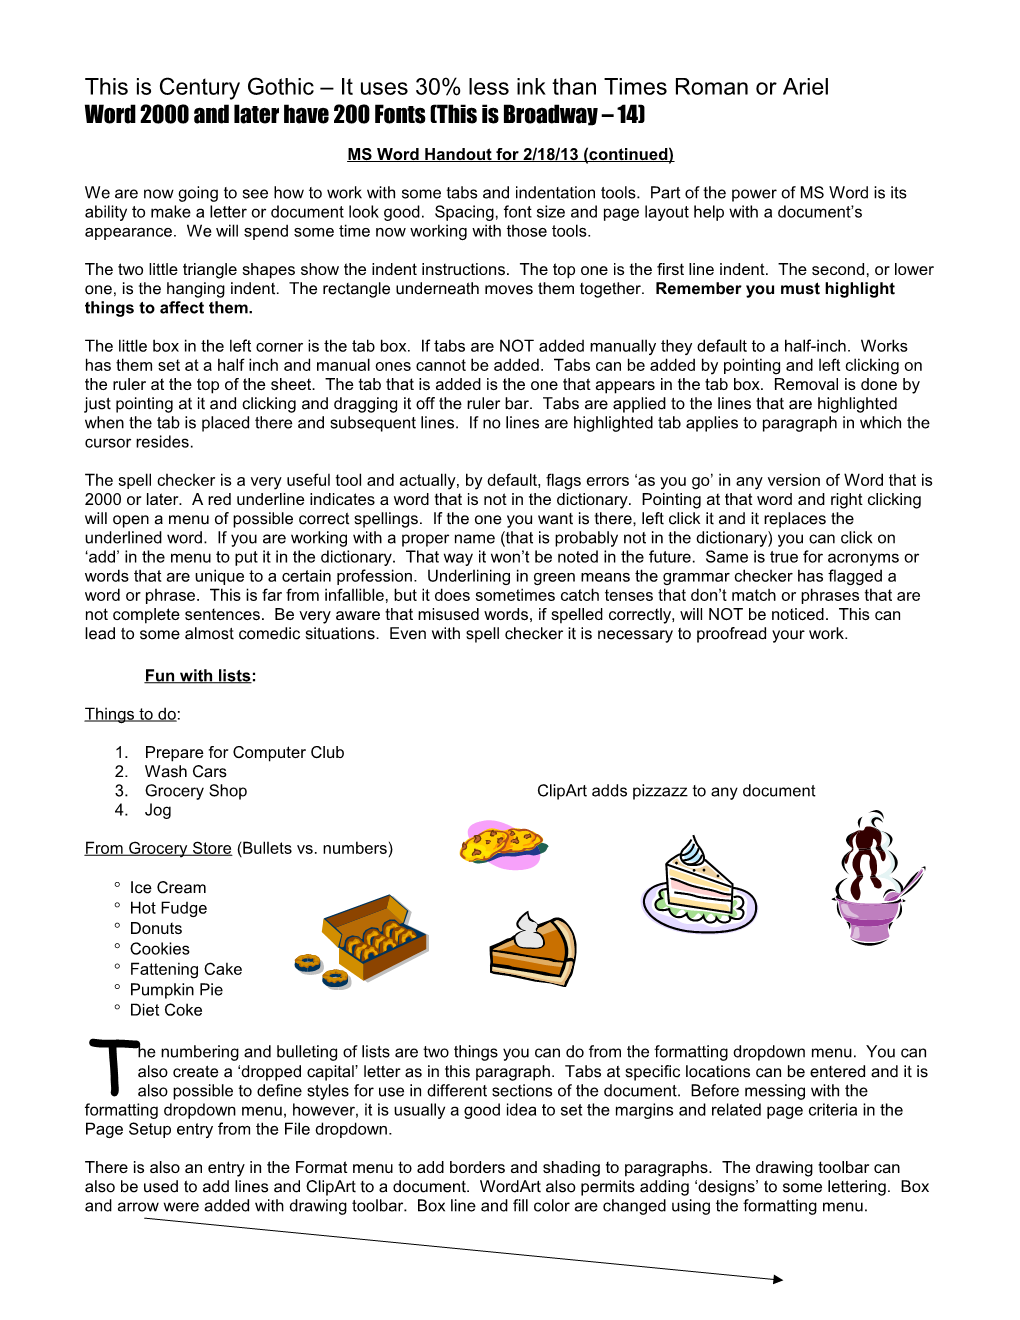 MS Word Handout for 1/19/04